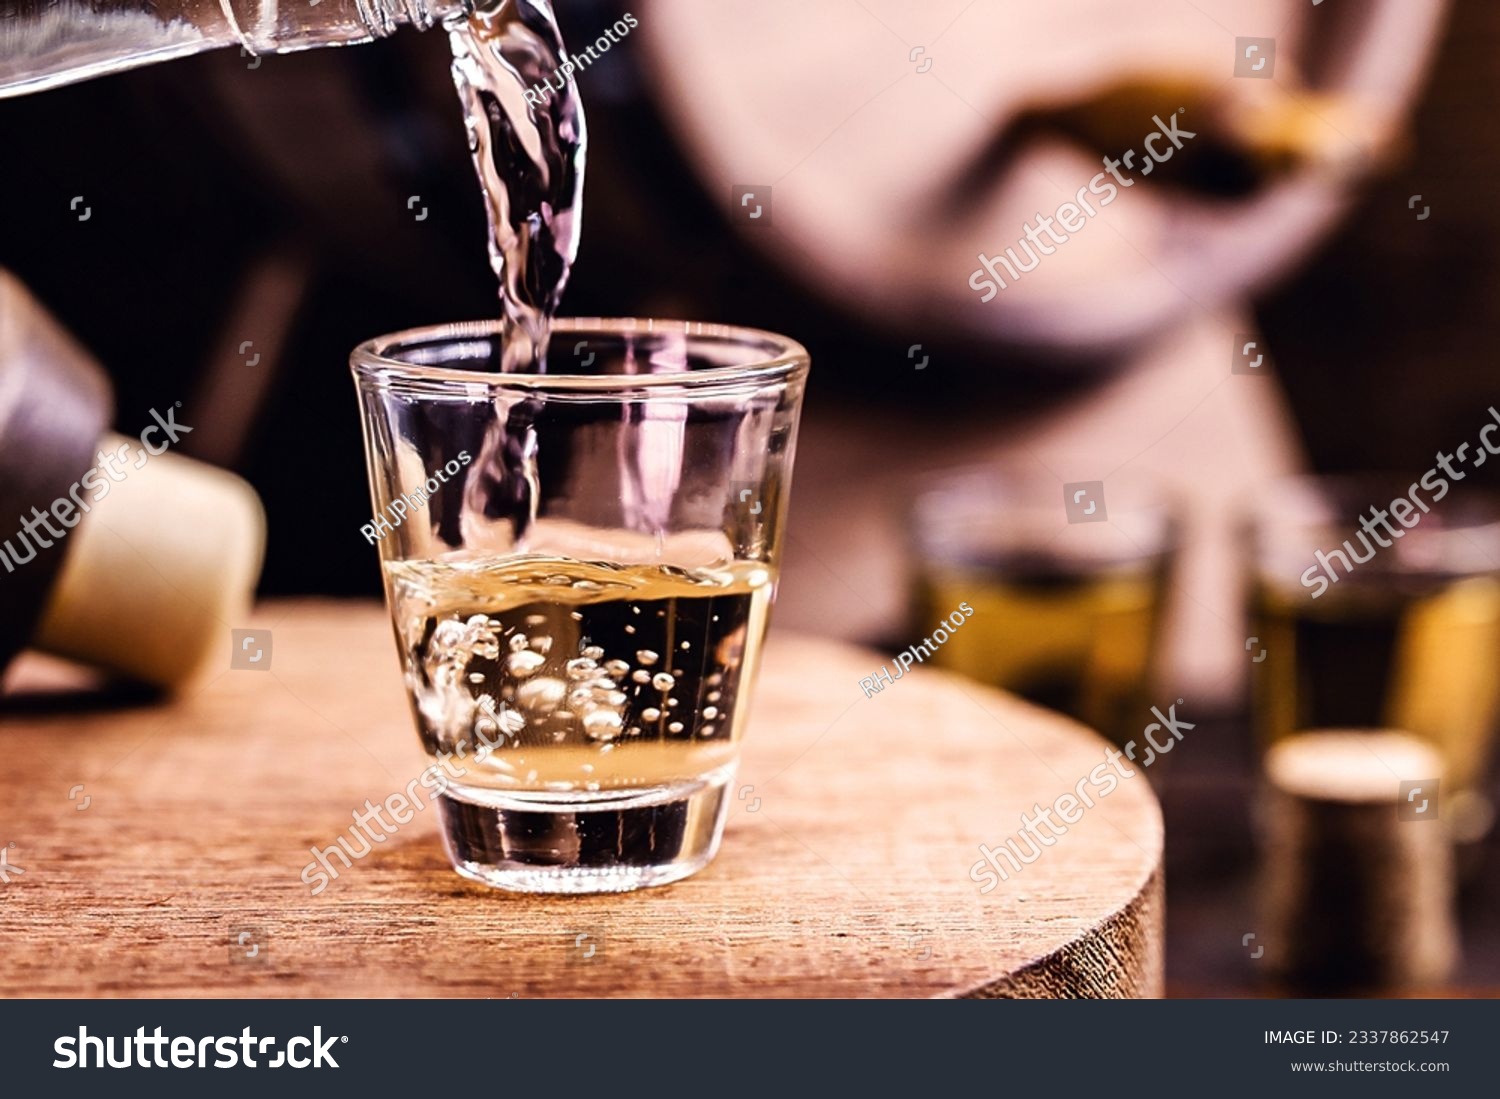 Glass of golden rum, with bottle. Bottle pouring alcohol into a small glass. Brazilian export type drink. Brazilian product for export, distilled drink known as brandy or pinga. Day of cachaça. #2337862547